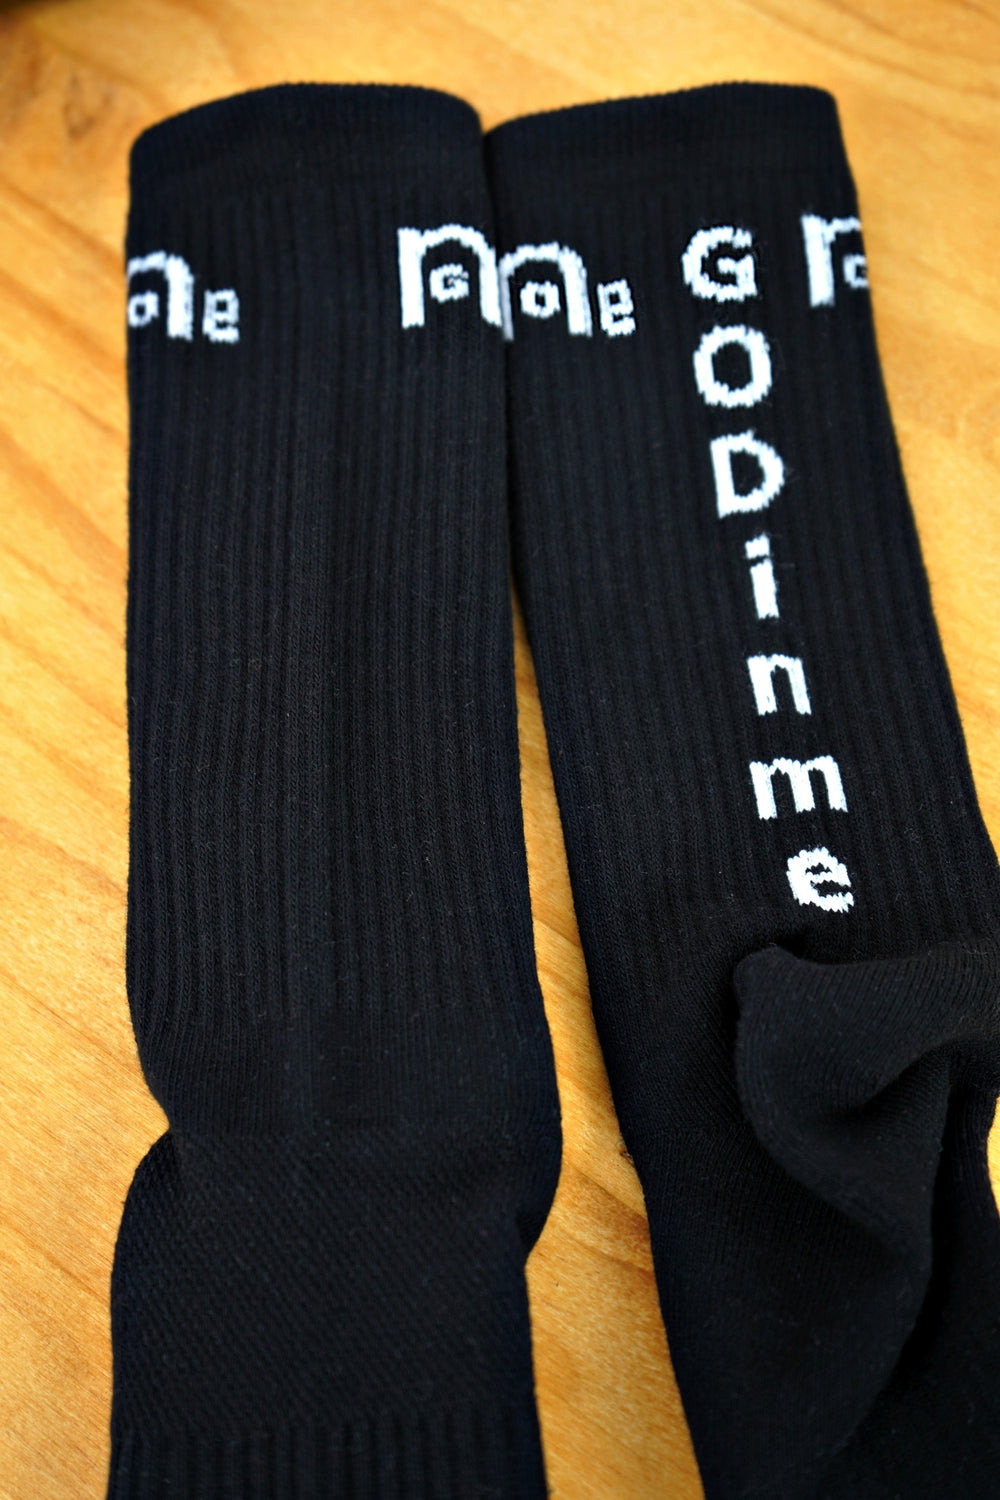 High quality Black Athletic Socks feature the powerful GODinme logo on each side, and GODinme name at toes and also at back achilles area to provide the confidence and motivation to reach your fitness goals.